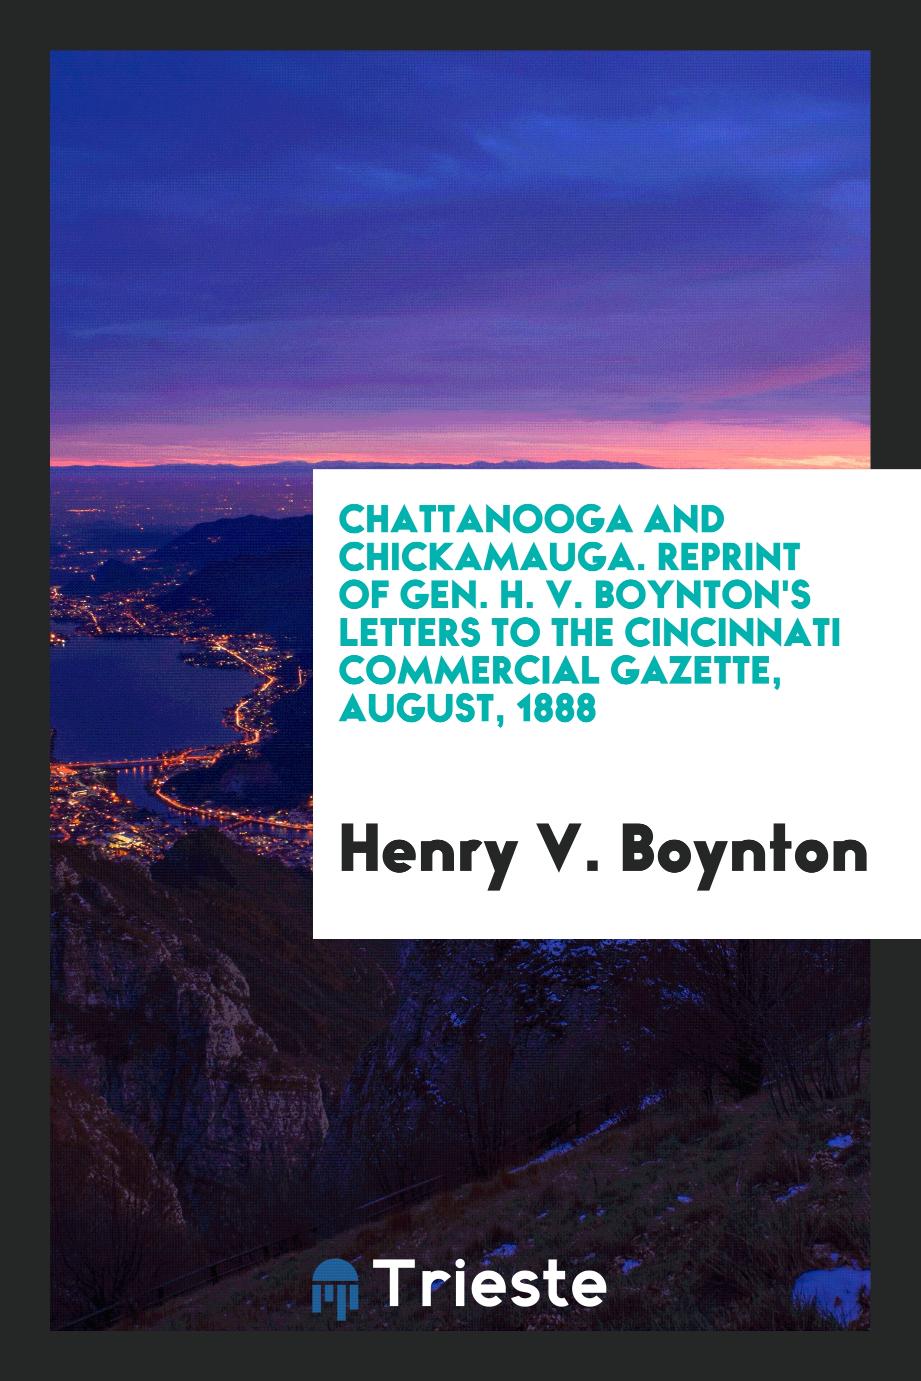 Chattanooga and Chickamauga. Reprint of Gen. H. V. Boynton's letters to the Cincinnati Commercial Gazette, August, 1888